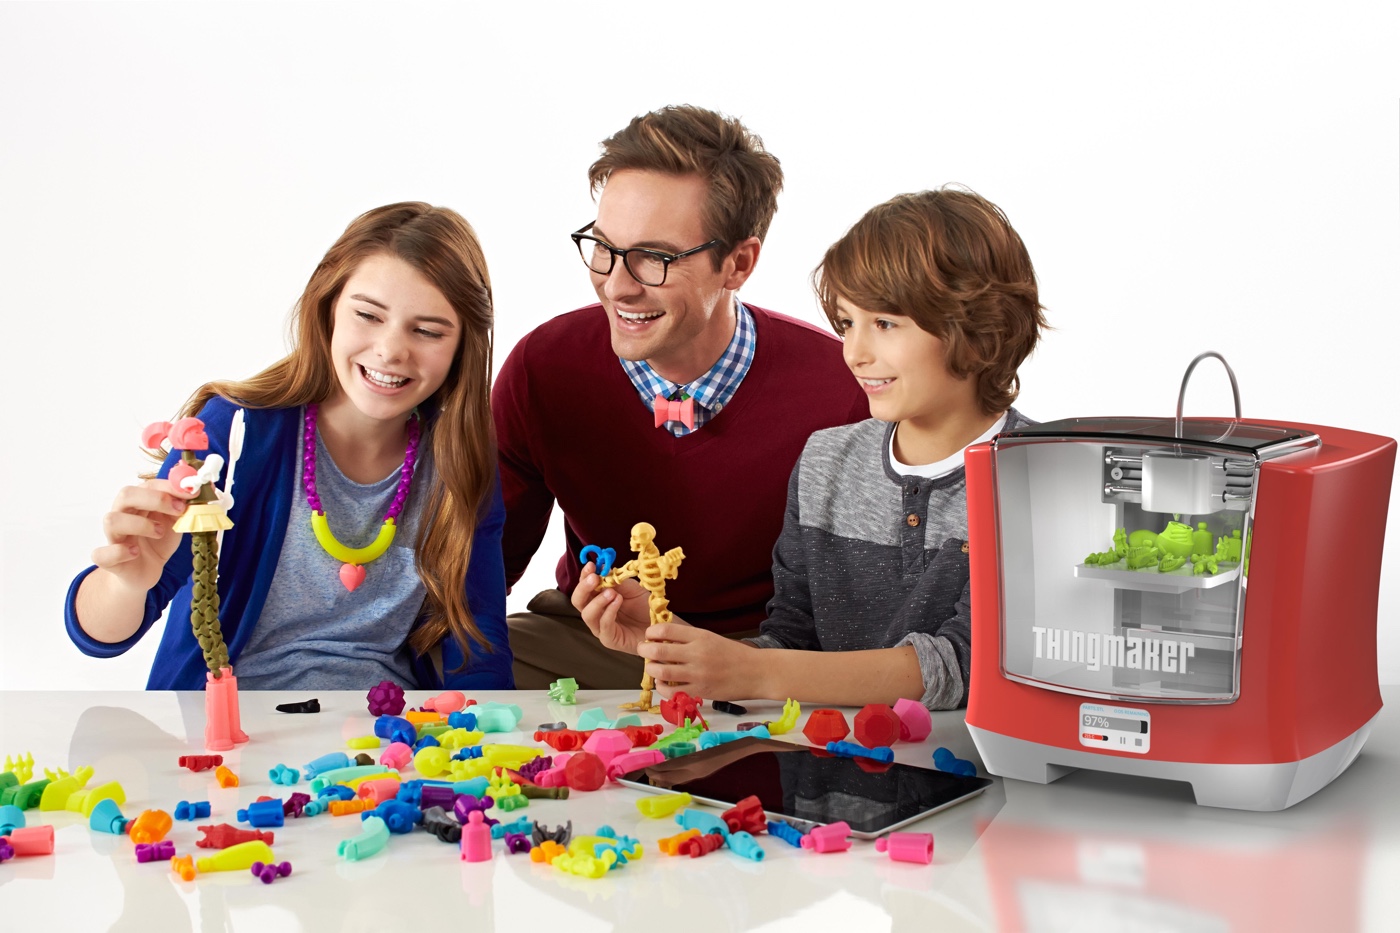 Thingmaker: A $300 3D Printer That Lets You Design and Create Your Own Toys